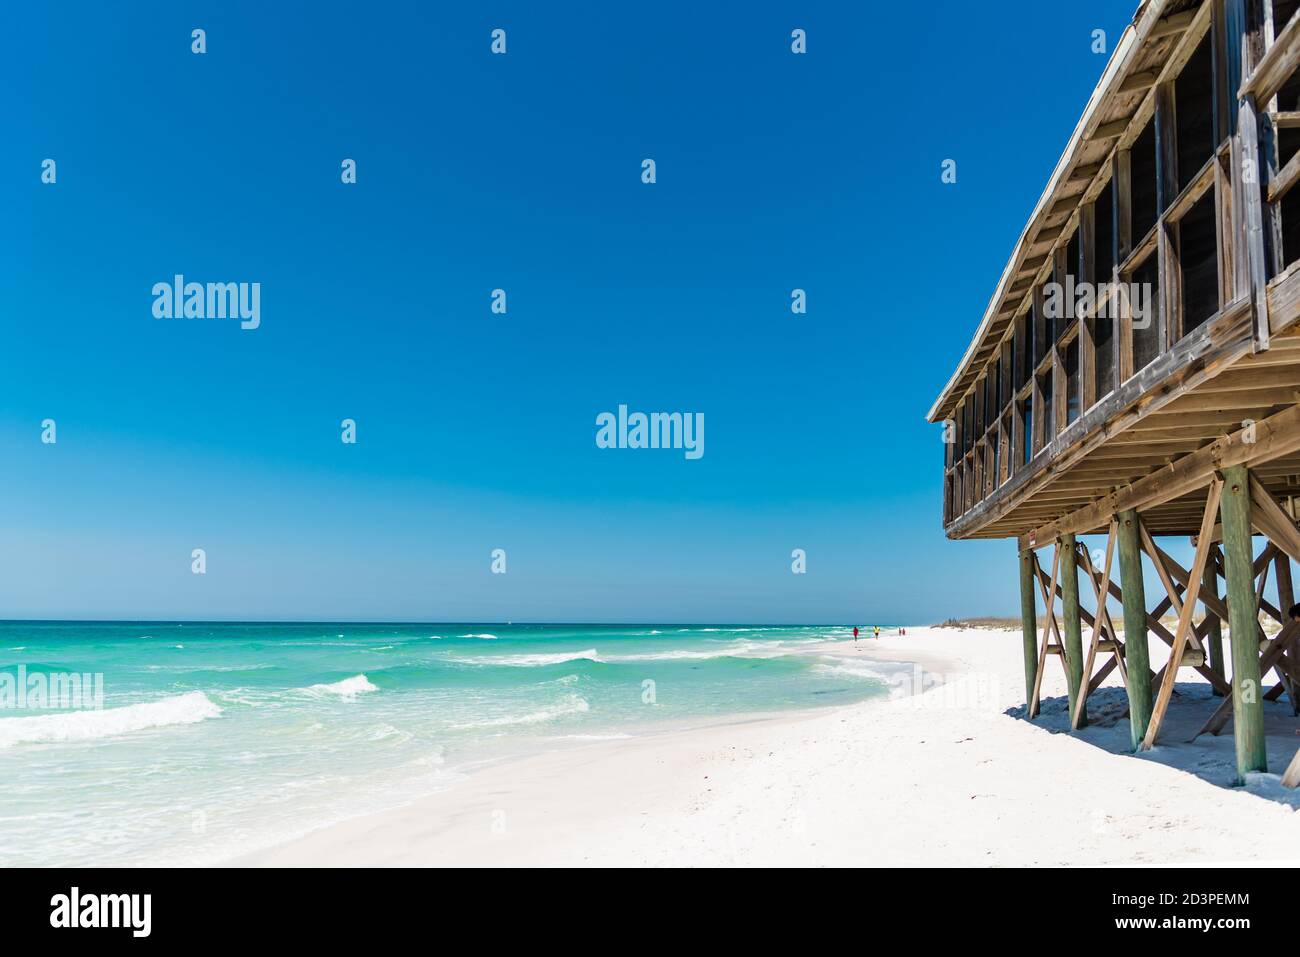 An old wooden beach house next to a clear blue ocean and white sand beach on Shell Island, Panama City, Florida Stock Photo